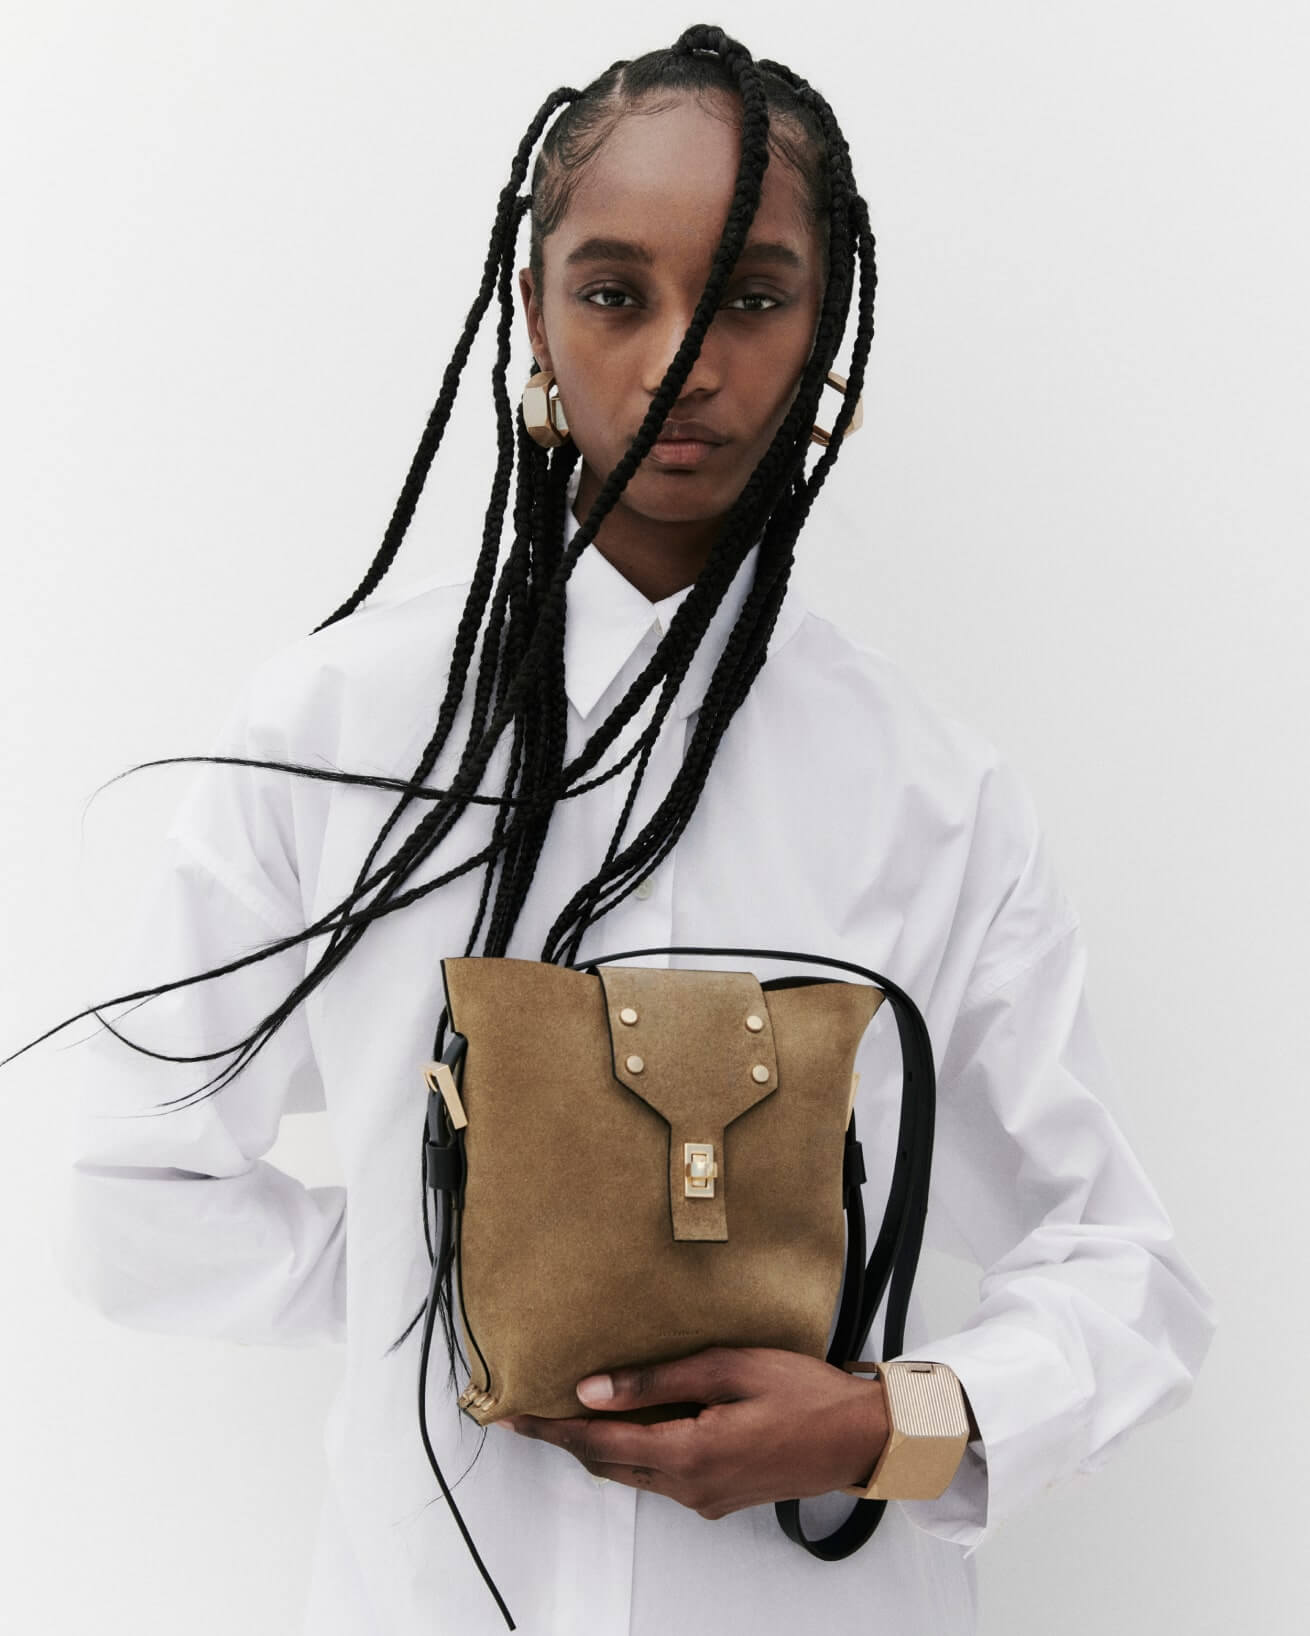 Woman wearing a white shirt, with suede leather shoulder bag and statement earrings and bracelet.